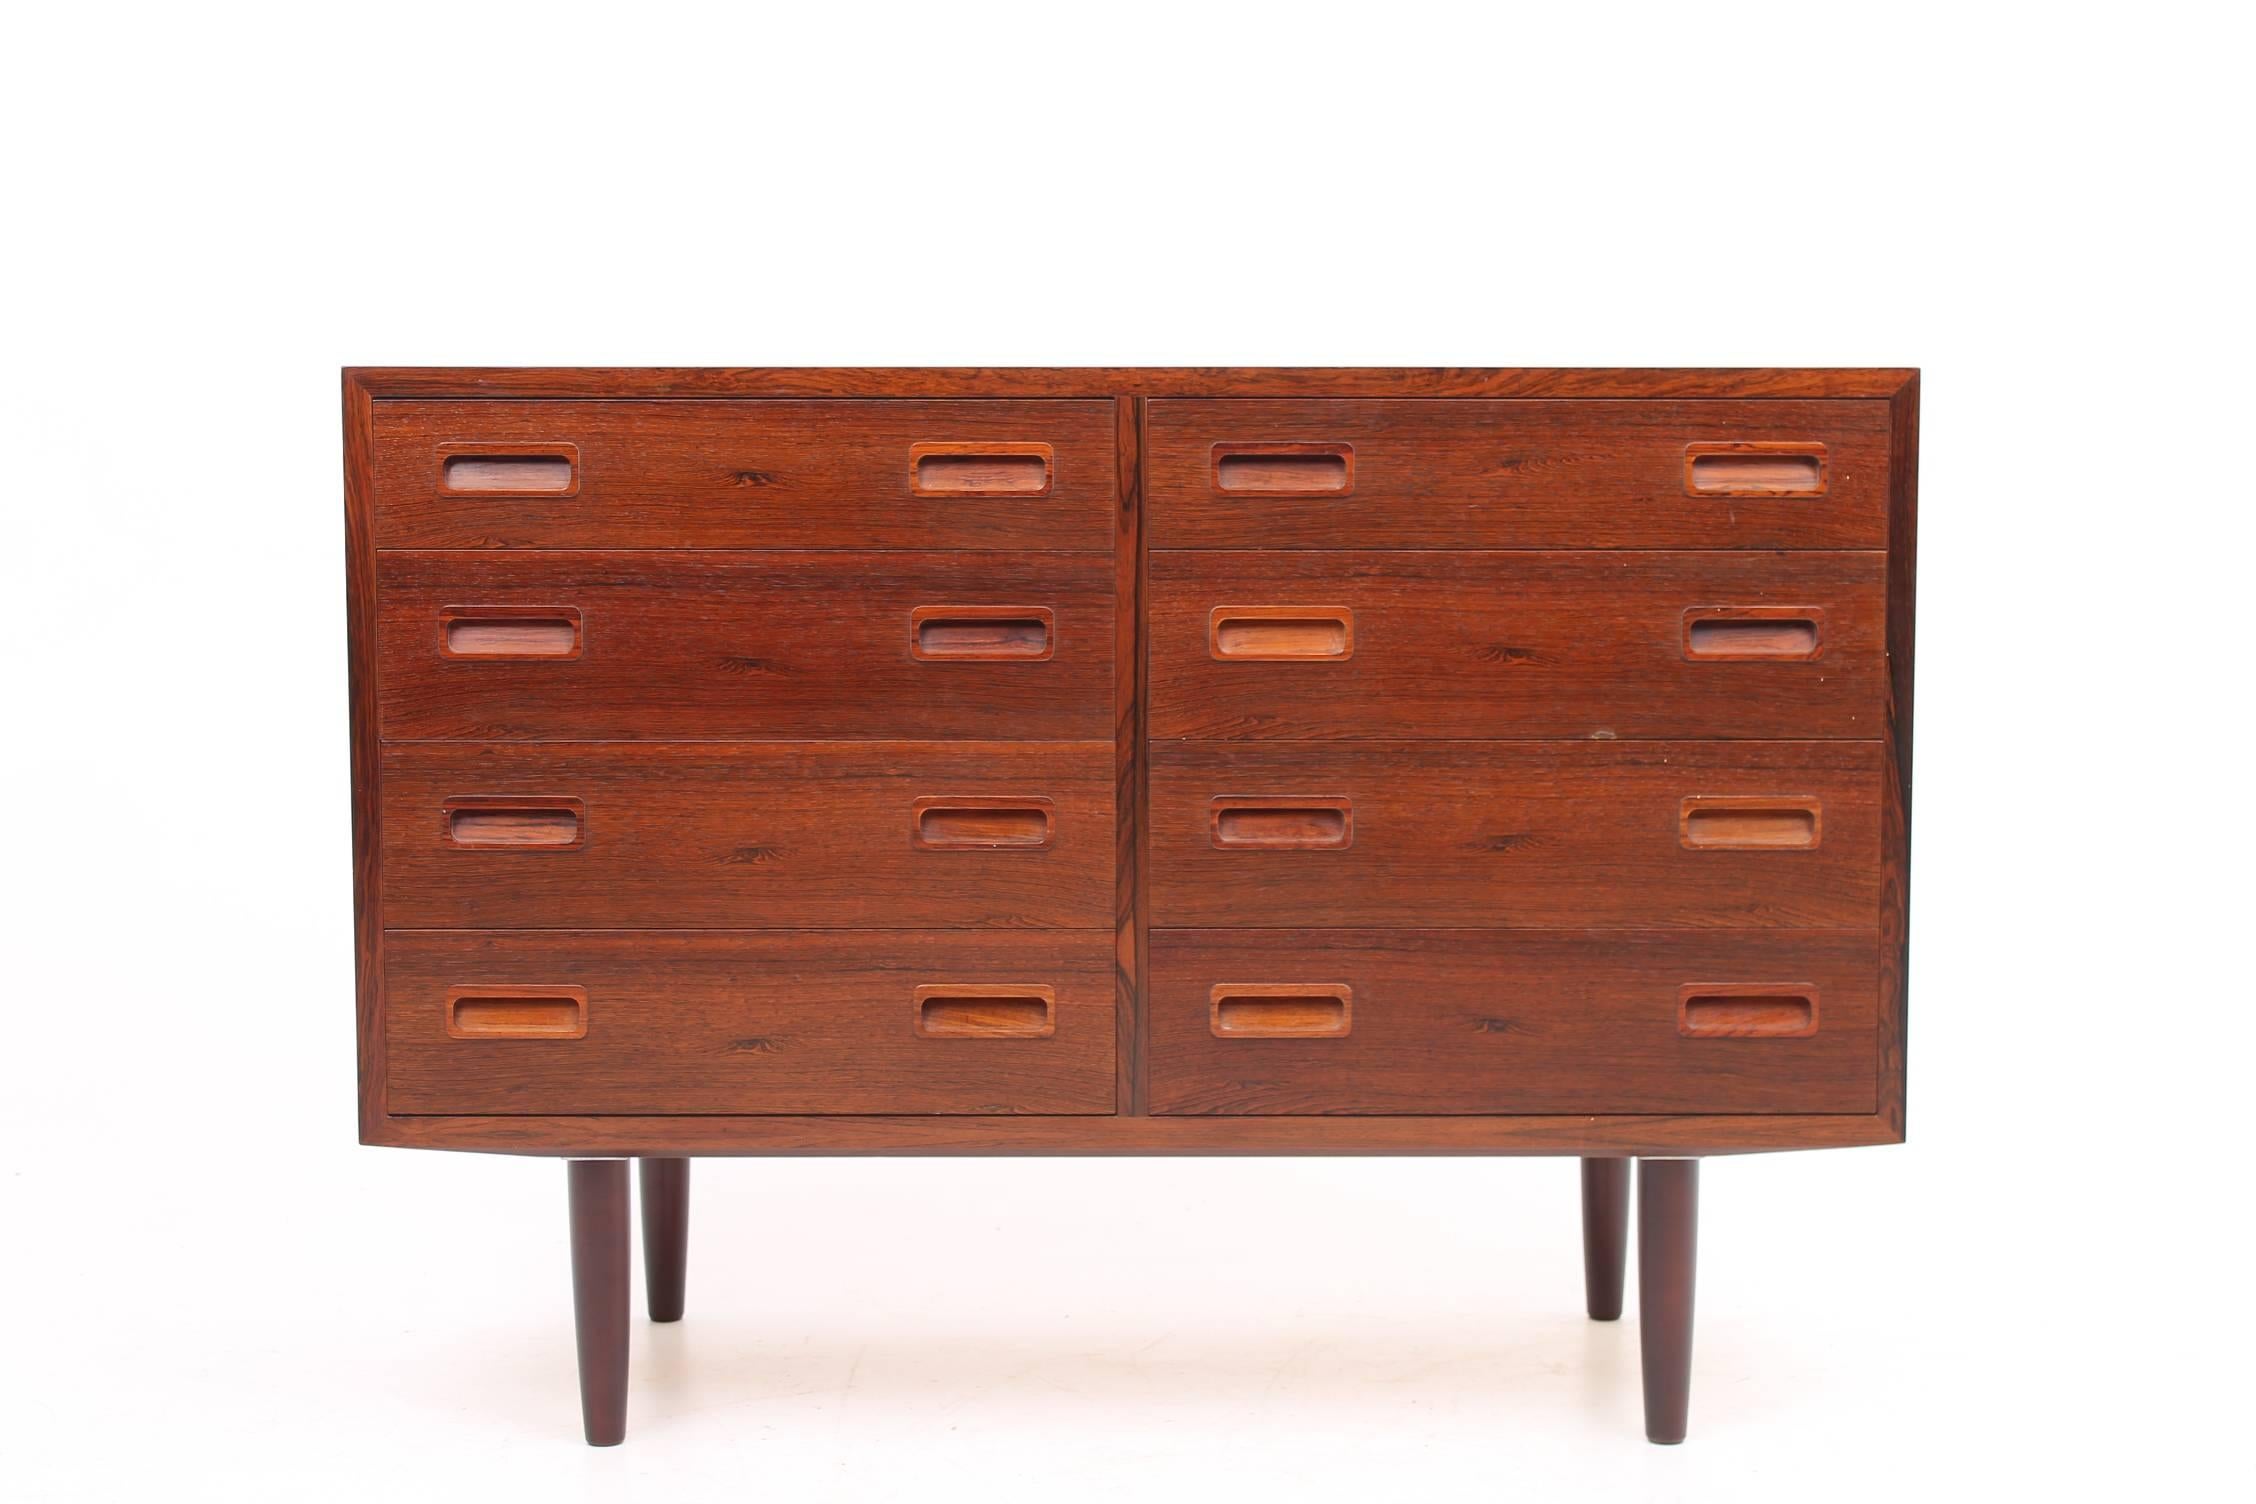 Beautiful chest of drawers made of rosewood designed by Poul Hundevad. This gorgeous storage has storage on both sides for a total of ten drawers. All of the handles are handmade of rosewood. The wood on this chest of gorgeous and has a thick,